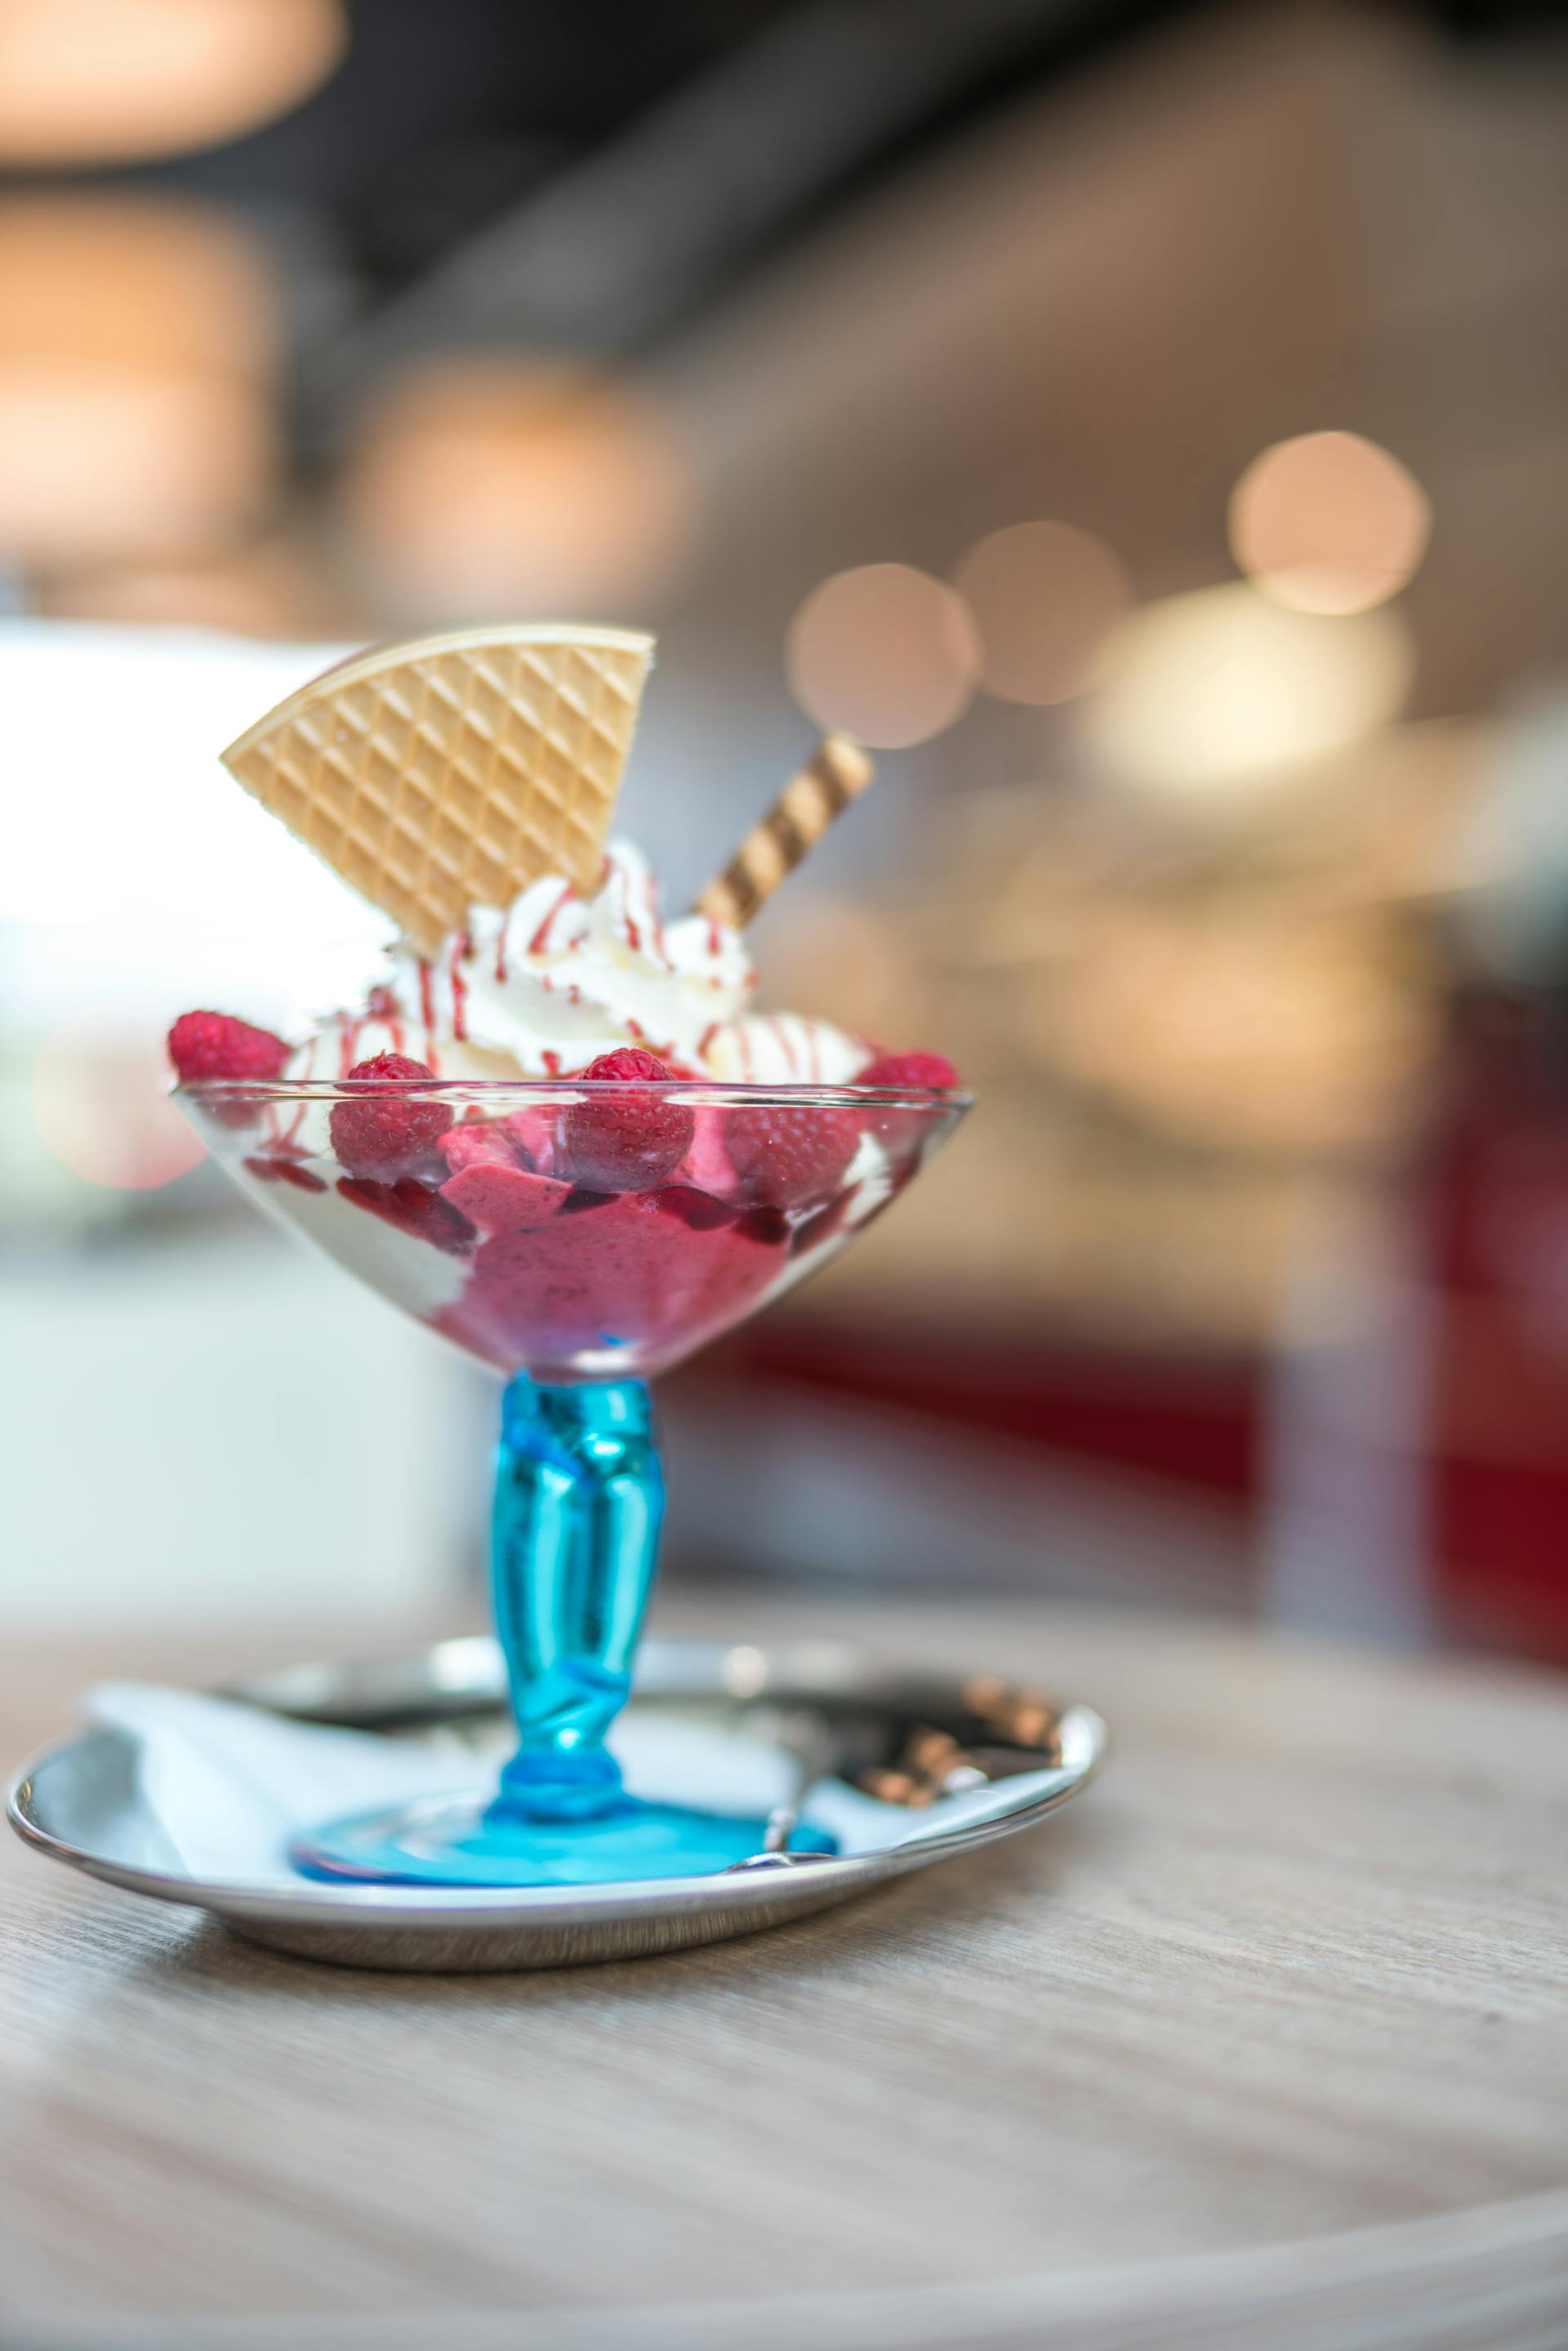 A selective focus photography of a strawberry ice cream with cookie | Source: Pexels